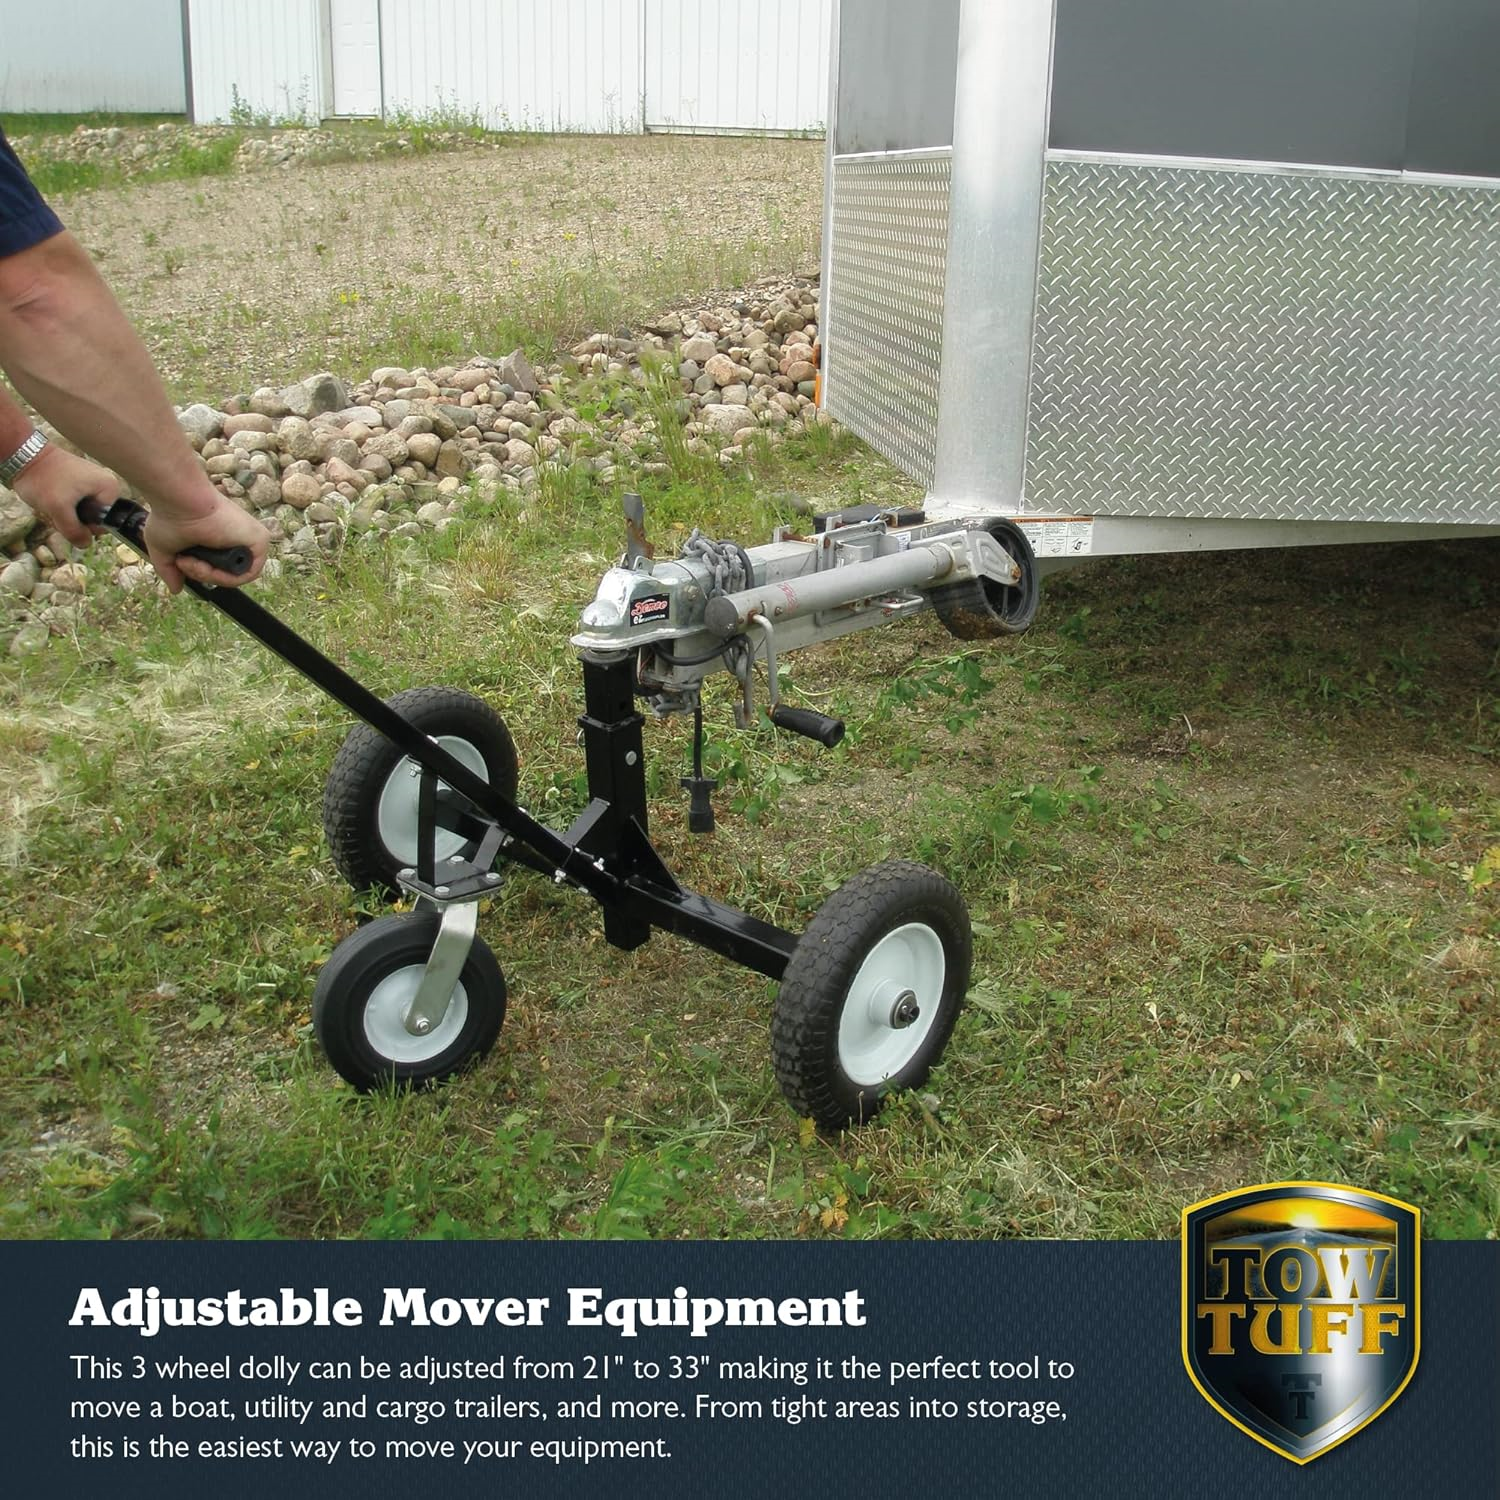 Tow Tuff, Tow Tuff TMD-1000C Trailer Dolly Adjustable 21" to 33" Max Weight 1000lbs Works with 2" Coupler or Larger New